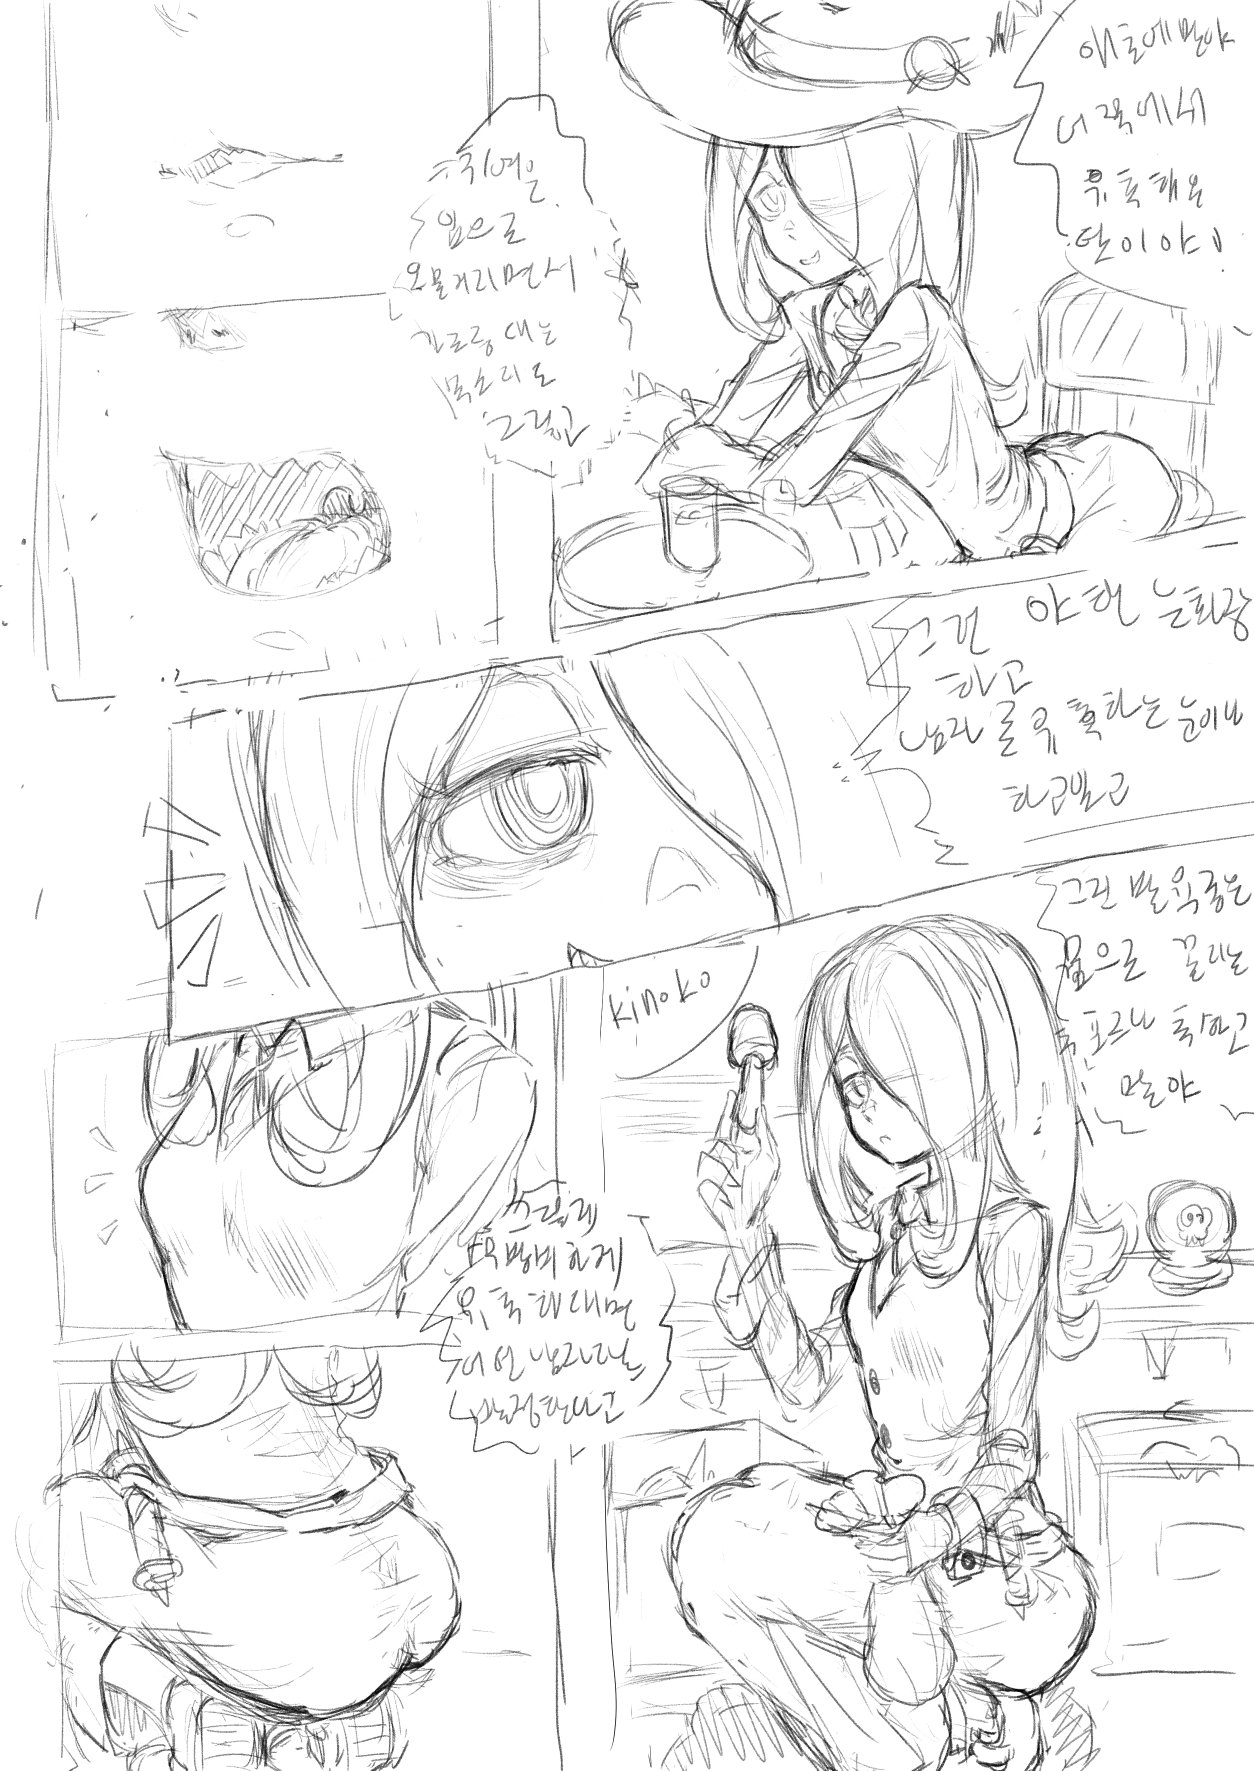 SUCY BOOK CONCEPT